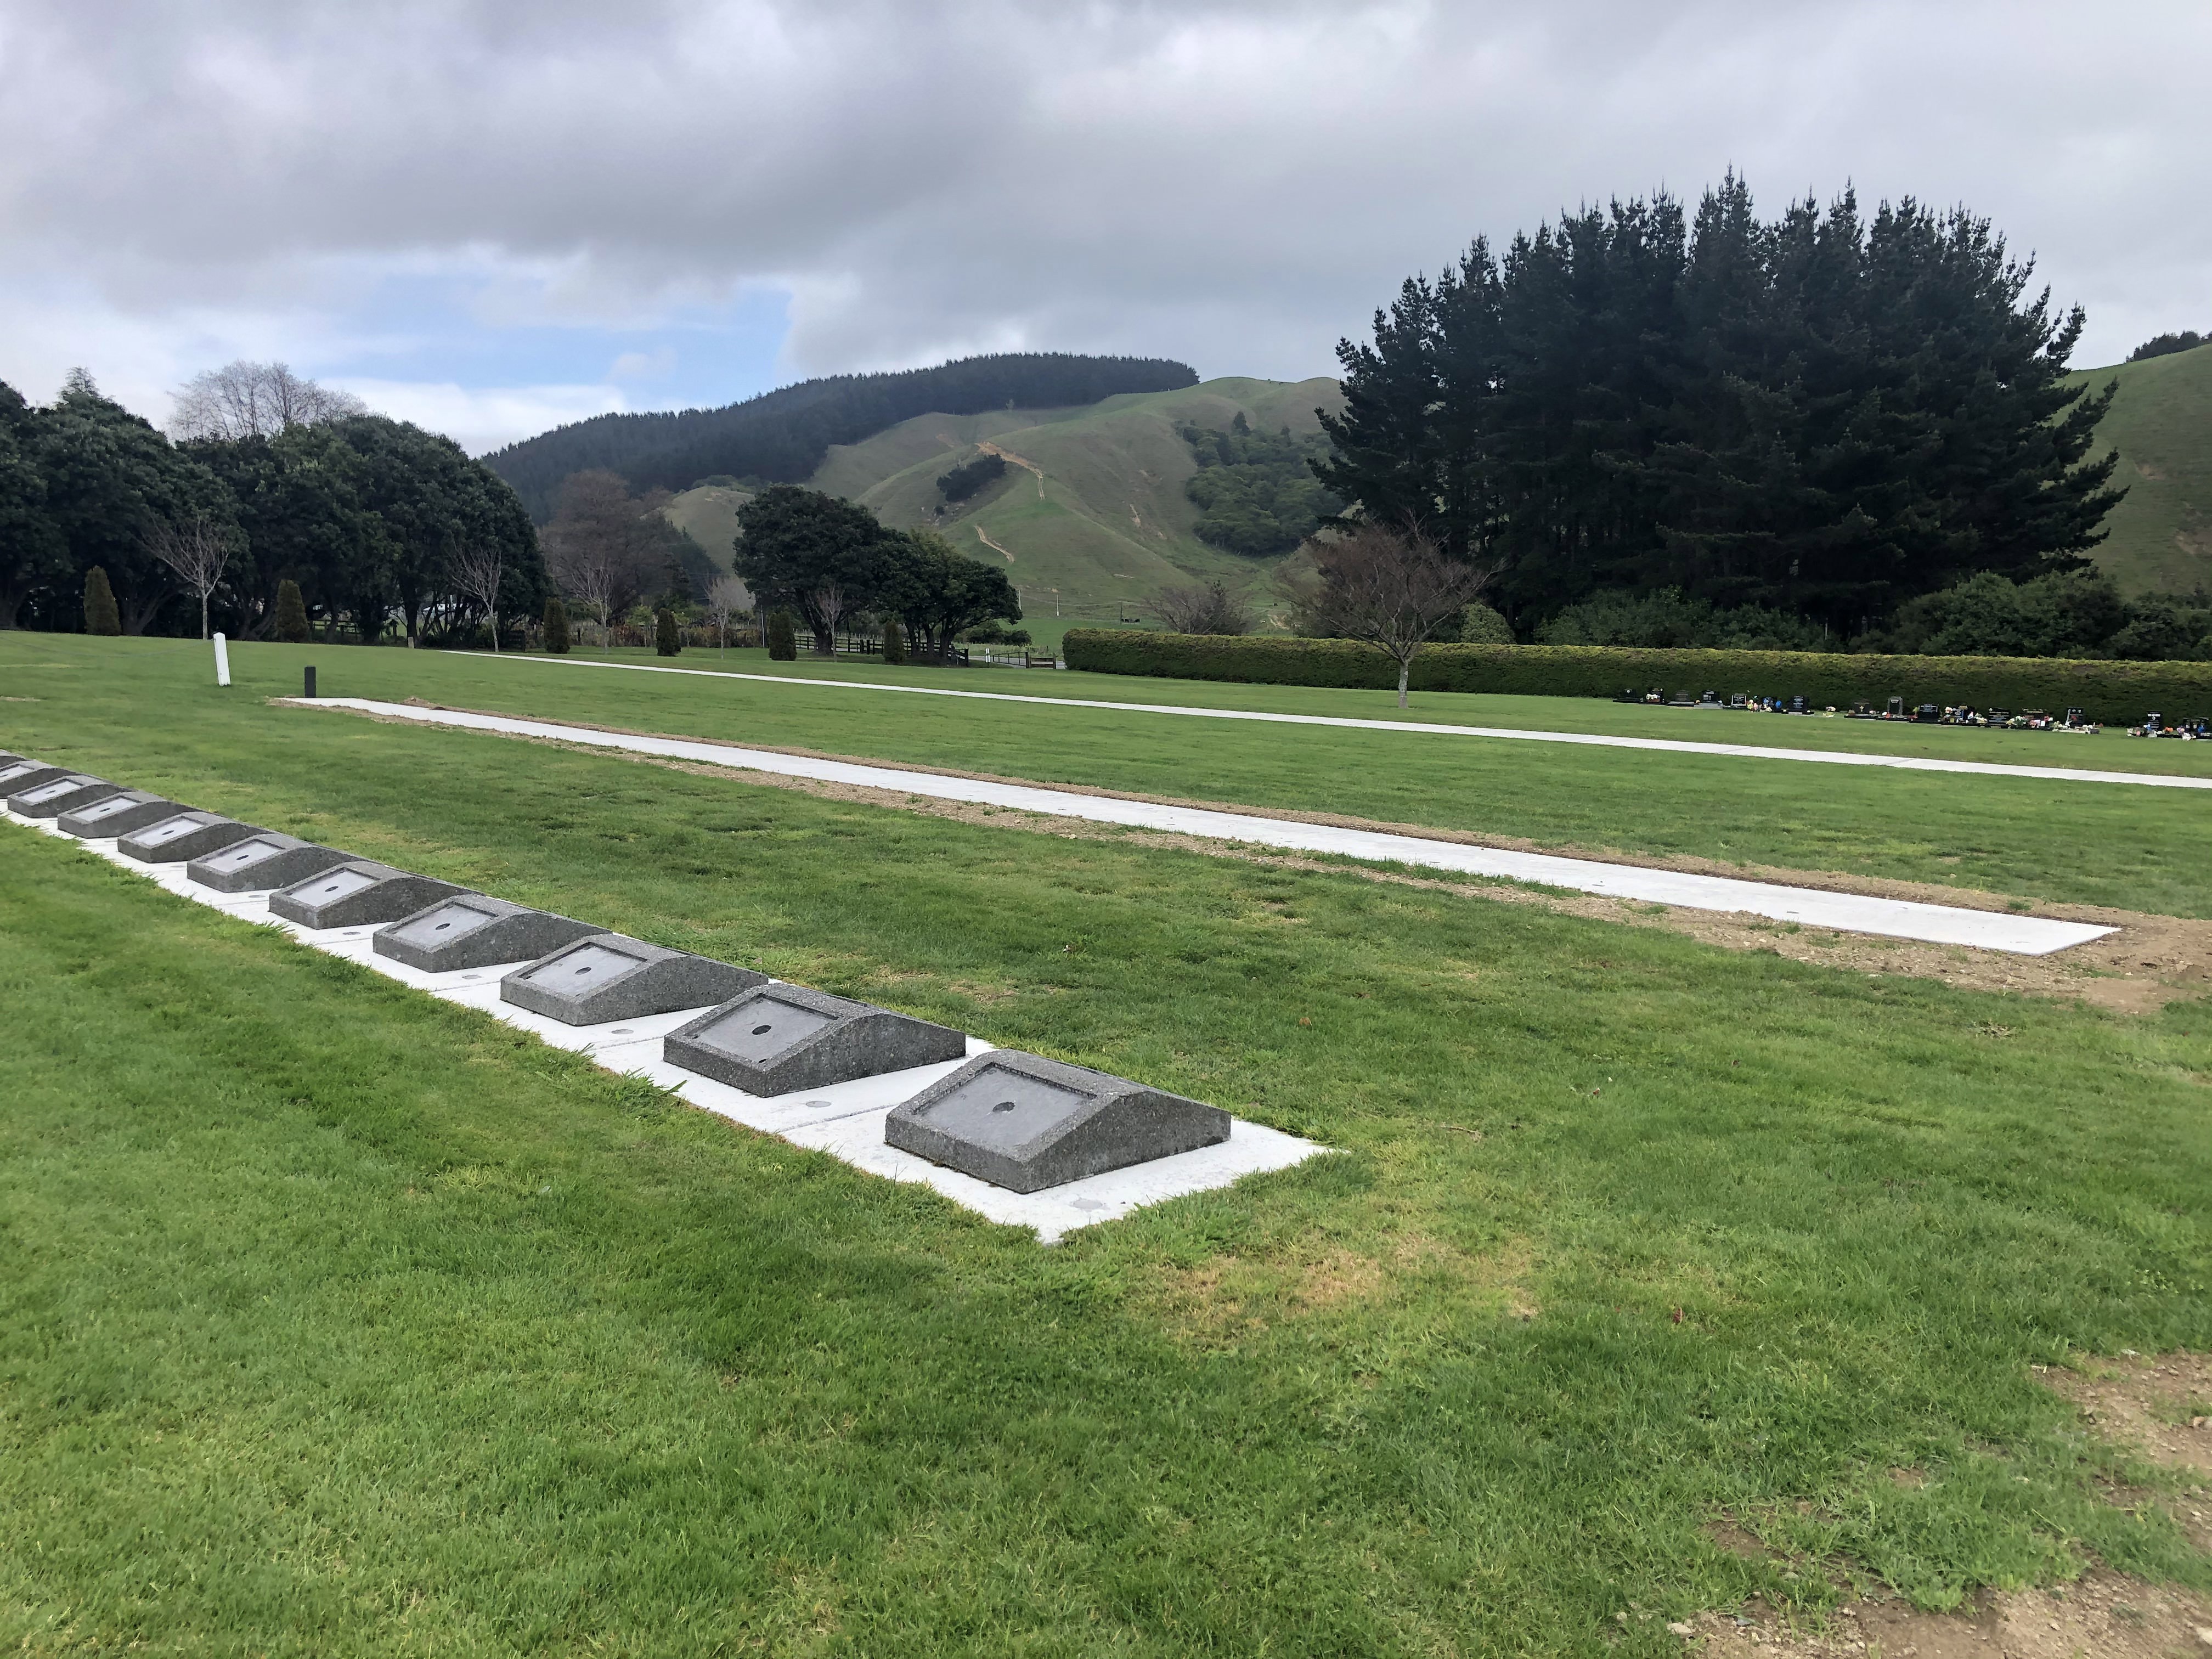 Photo of graves at Awa Tapu Cemetery